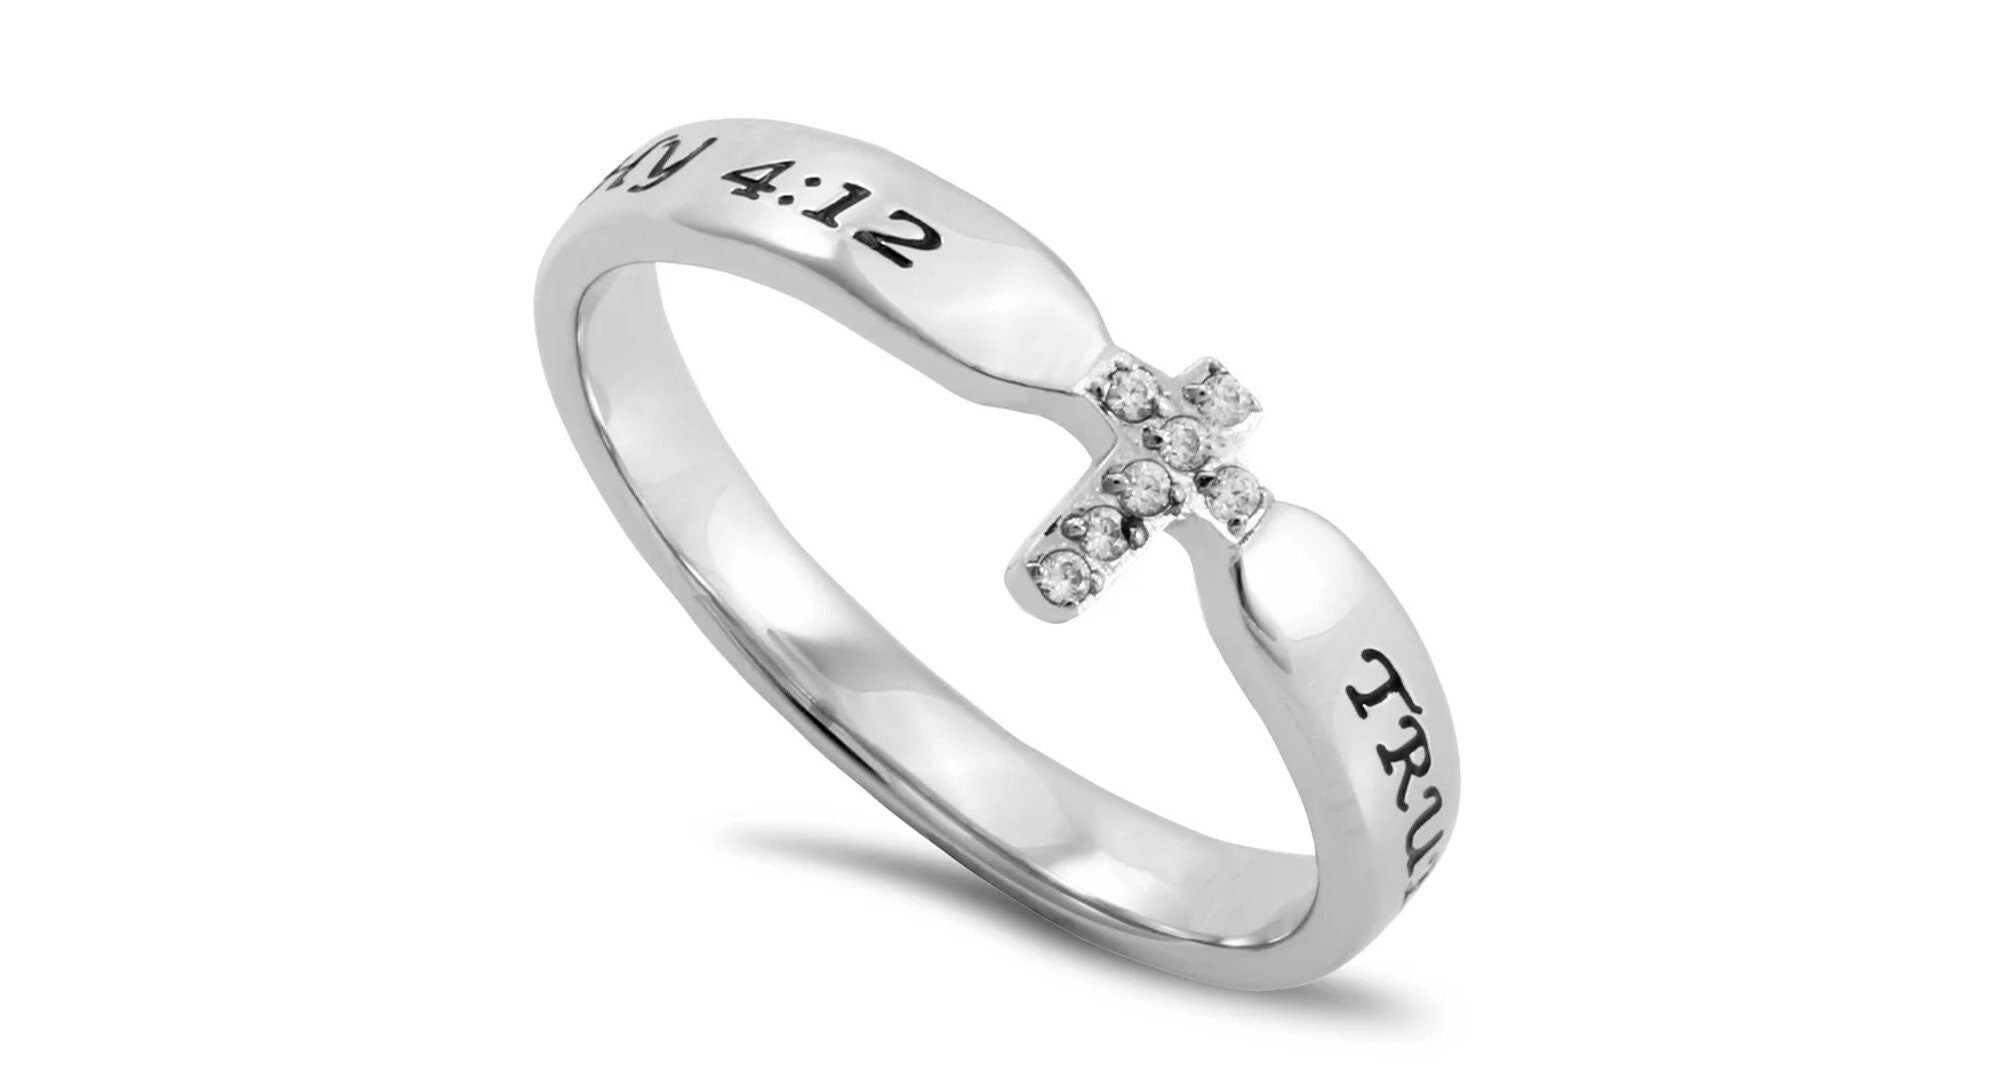 Lumen Latest Stylish Couple Ring Heart Design Silver Colour For Girls Boys  Women Men Husband Wife. at Rs 80/piece | New Items in New Delhi | ID:  25968579655